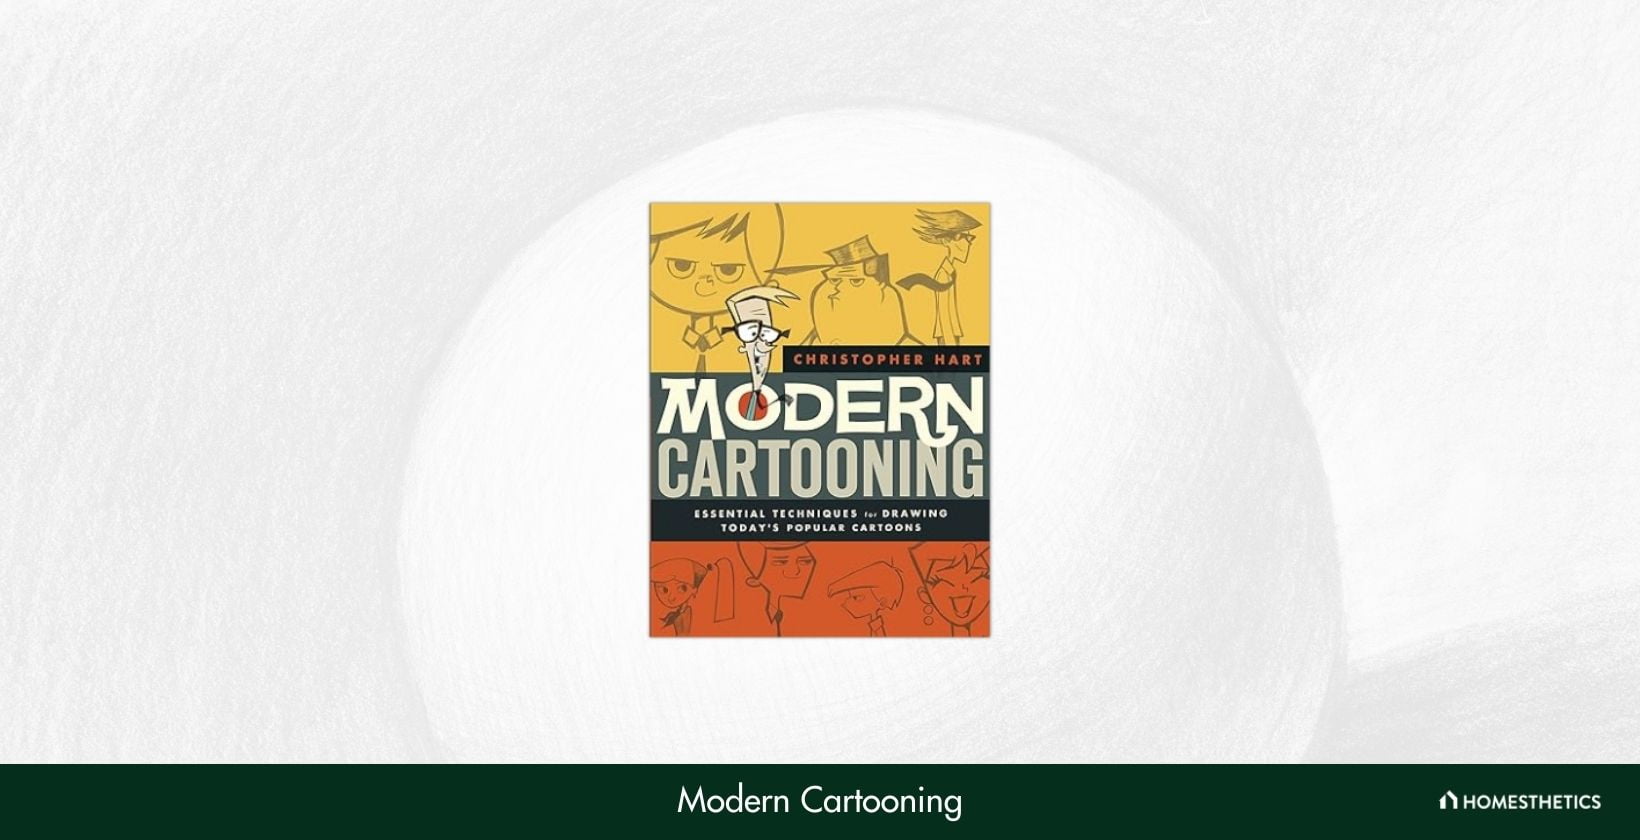 Modern Cartooning Essential Techniques for Drawing Todays Popular Cartoons by Christopher Hart